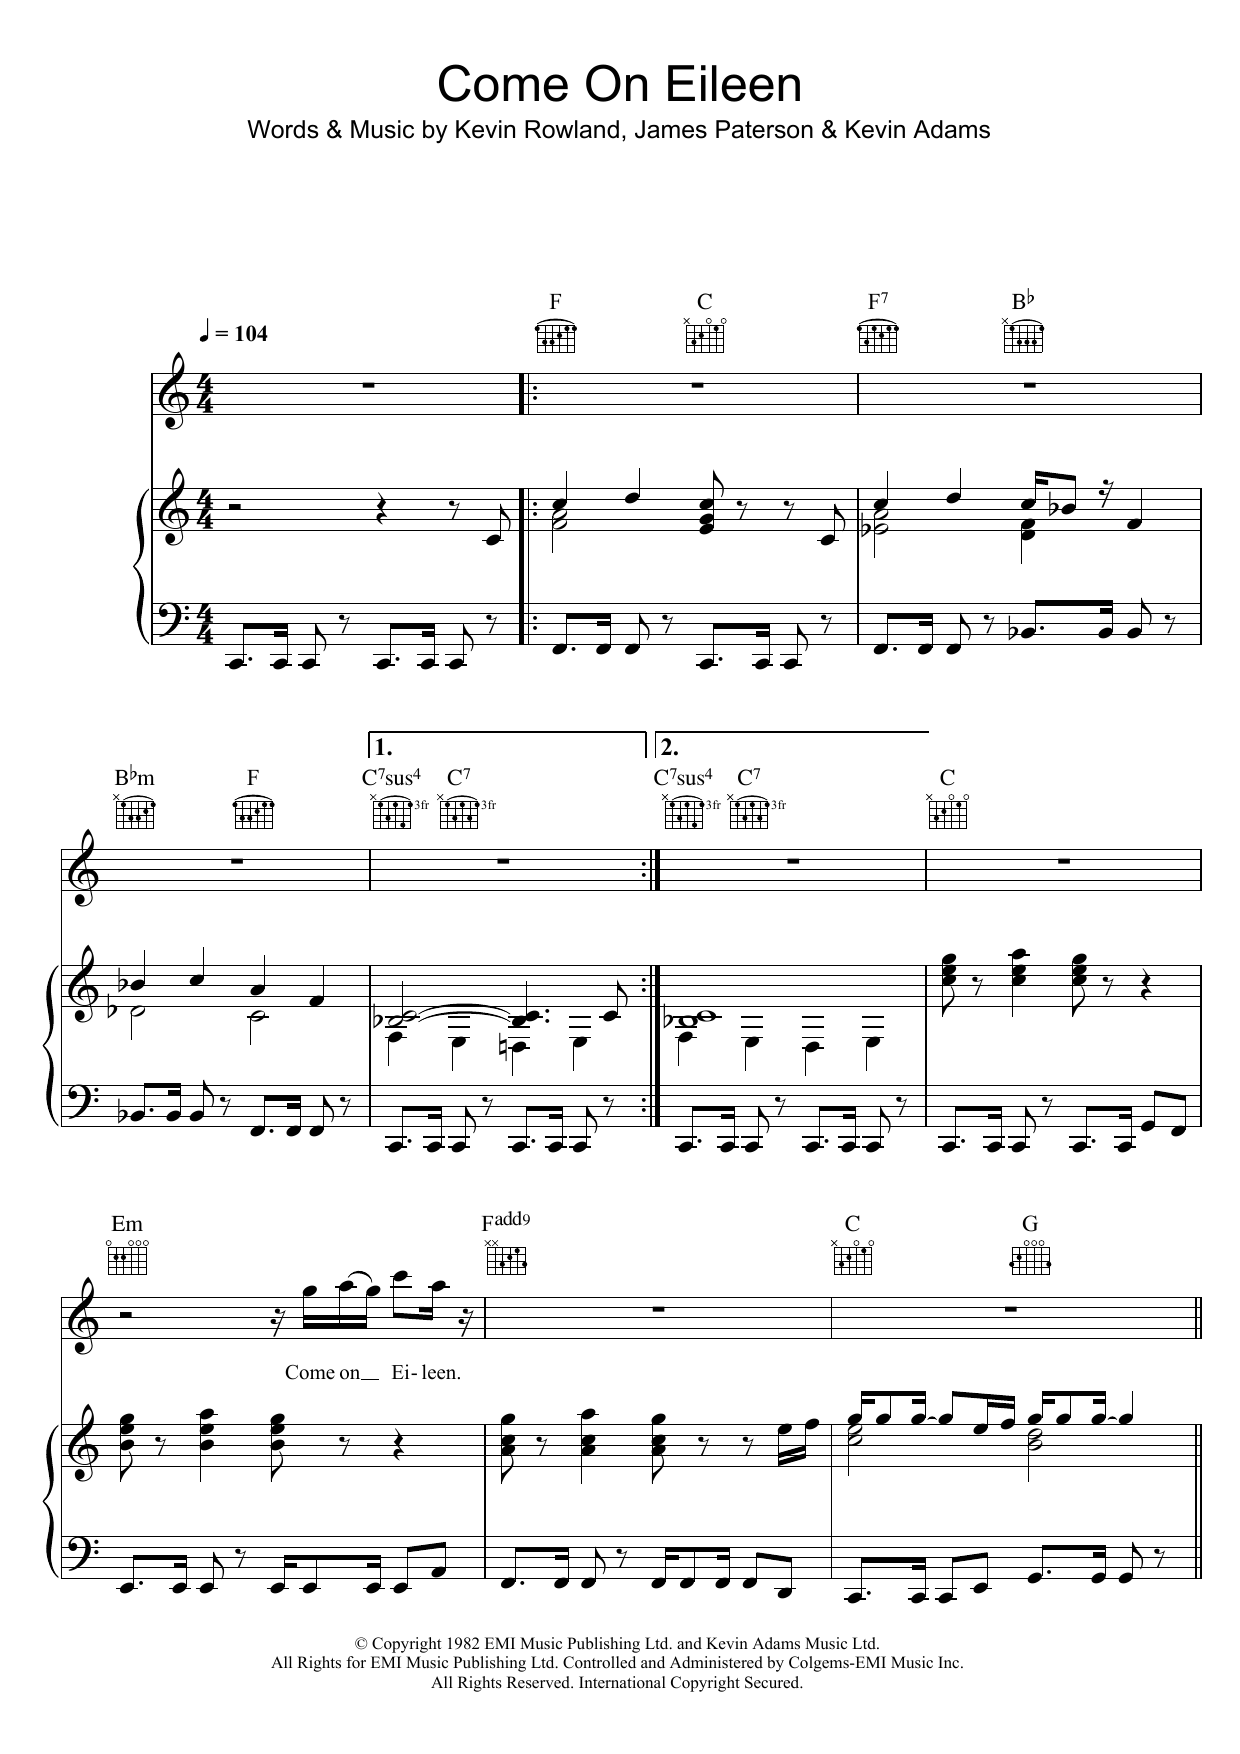 Dexy's Midnight Runners "Come On Eileen" Sheet Music Download Printable Pop PDF Score | How To Play On Ukulele? SKU 120360